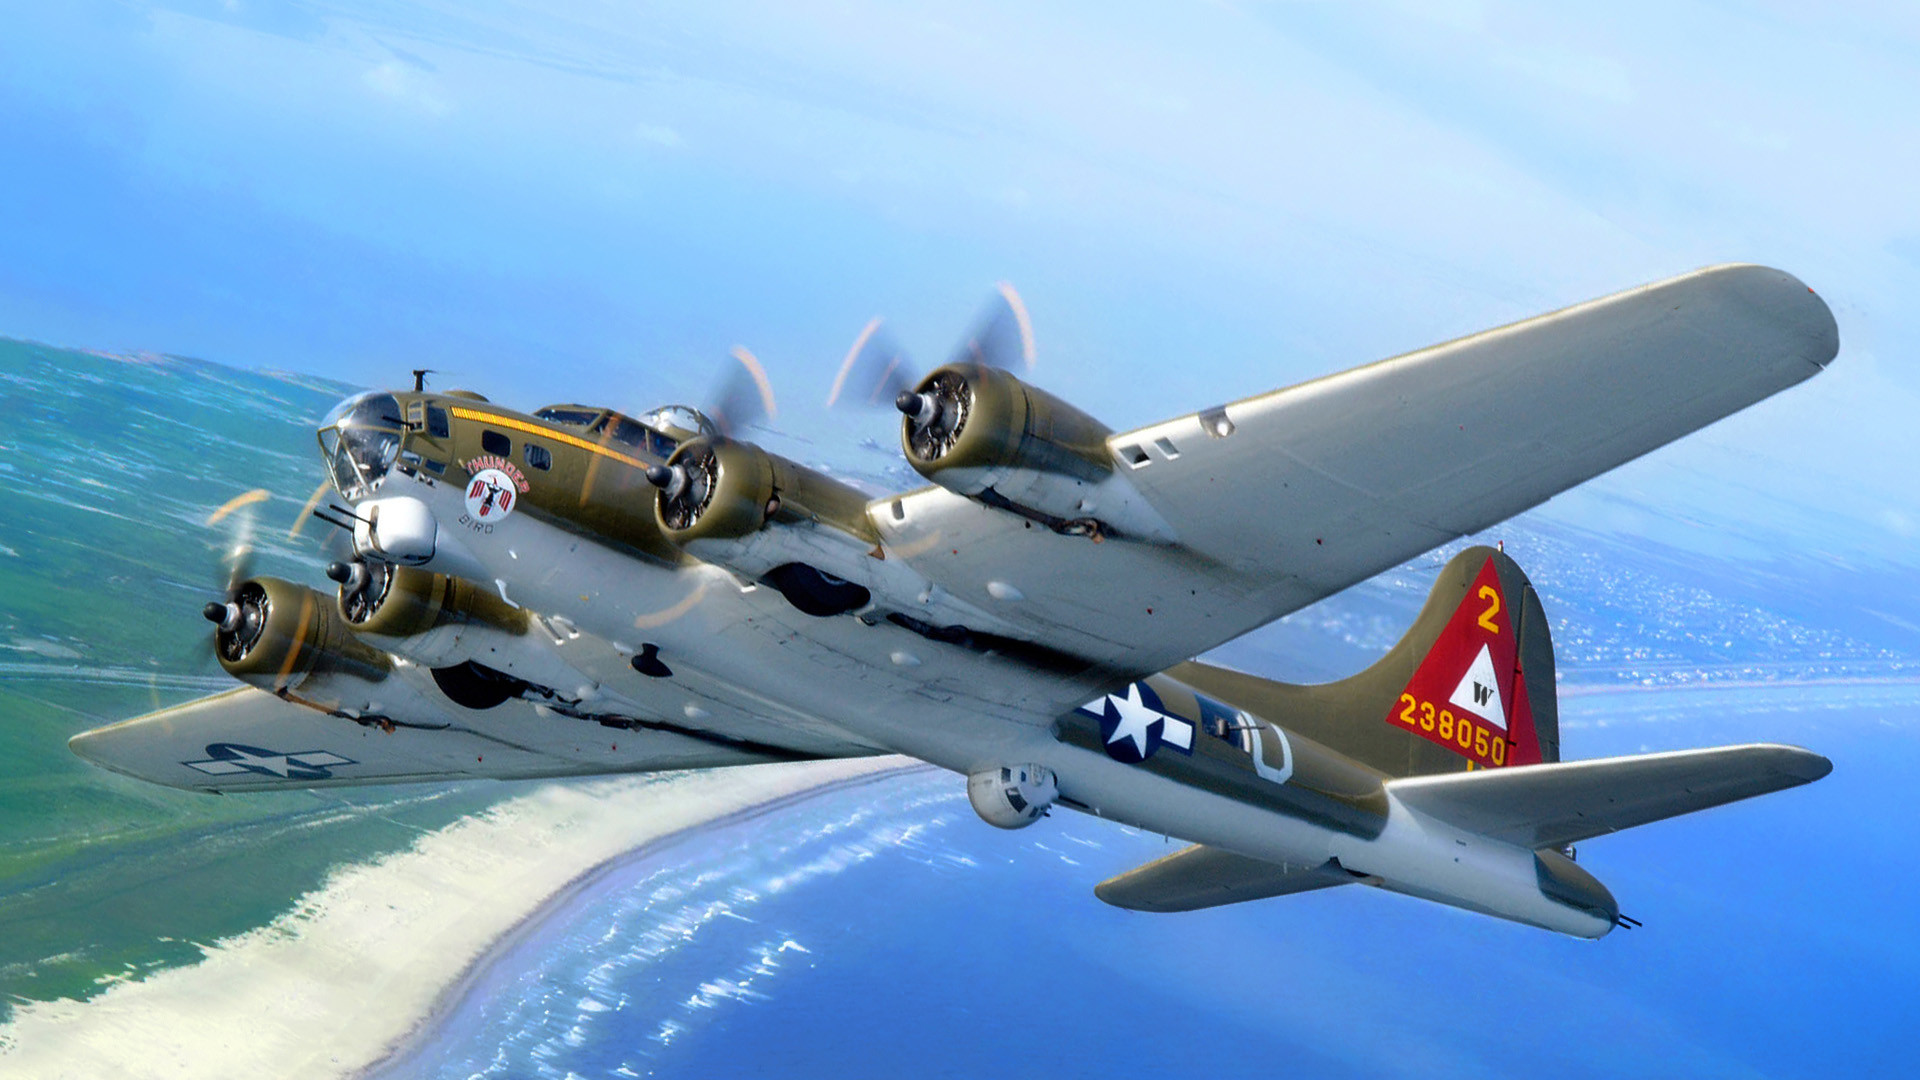 1920x1080 The Boeing B-17 Flying Fortress is a four-engine heavy bomber aircraft  primarily